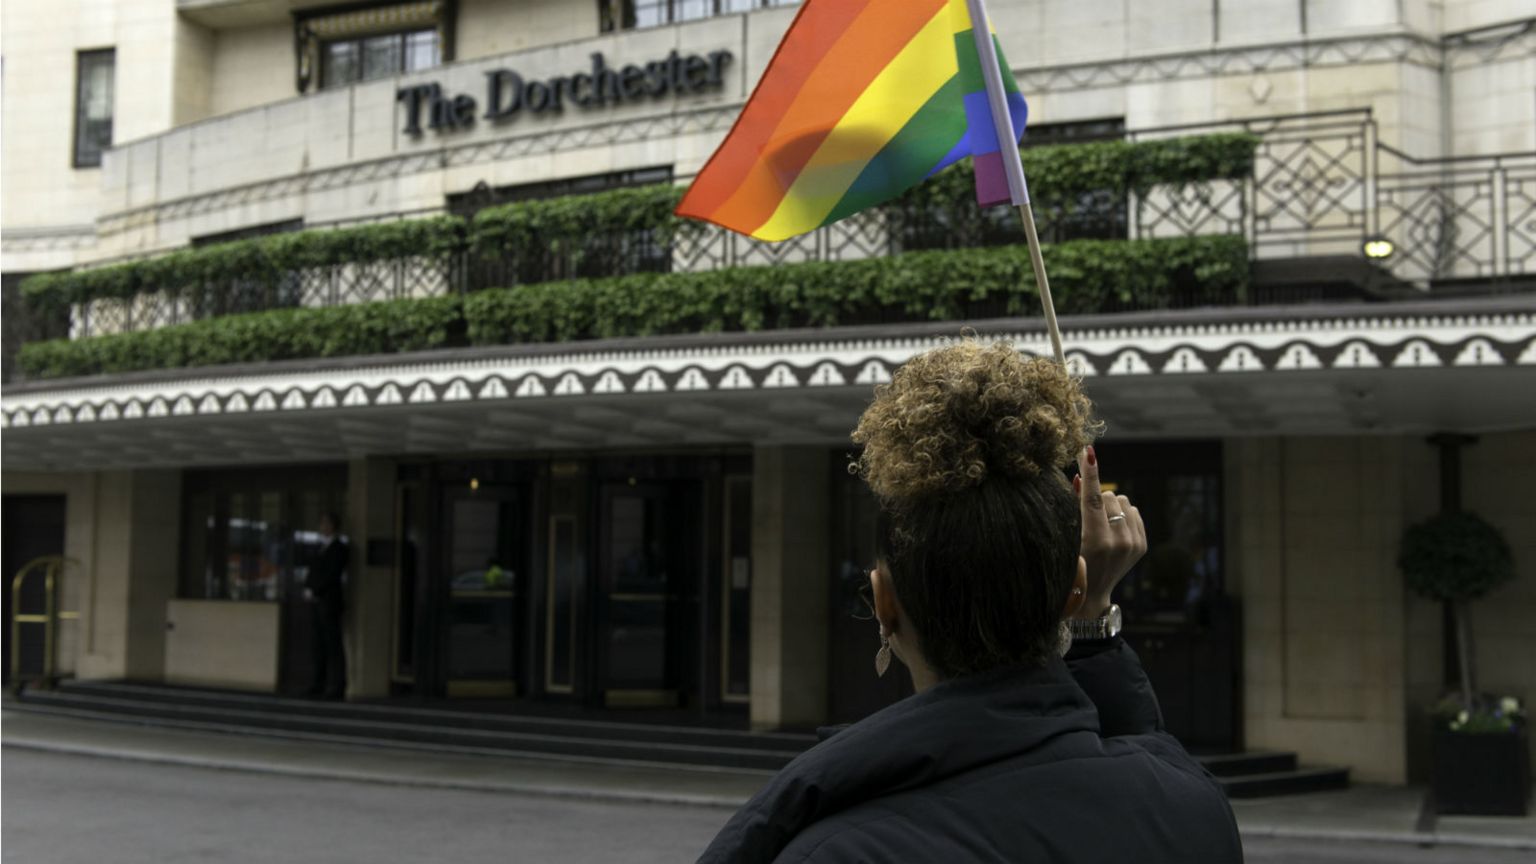 A protester seen holding an LGBT flag outside the Dorchester hotel during the protest condemning the new Brunei laws